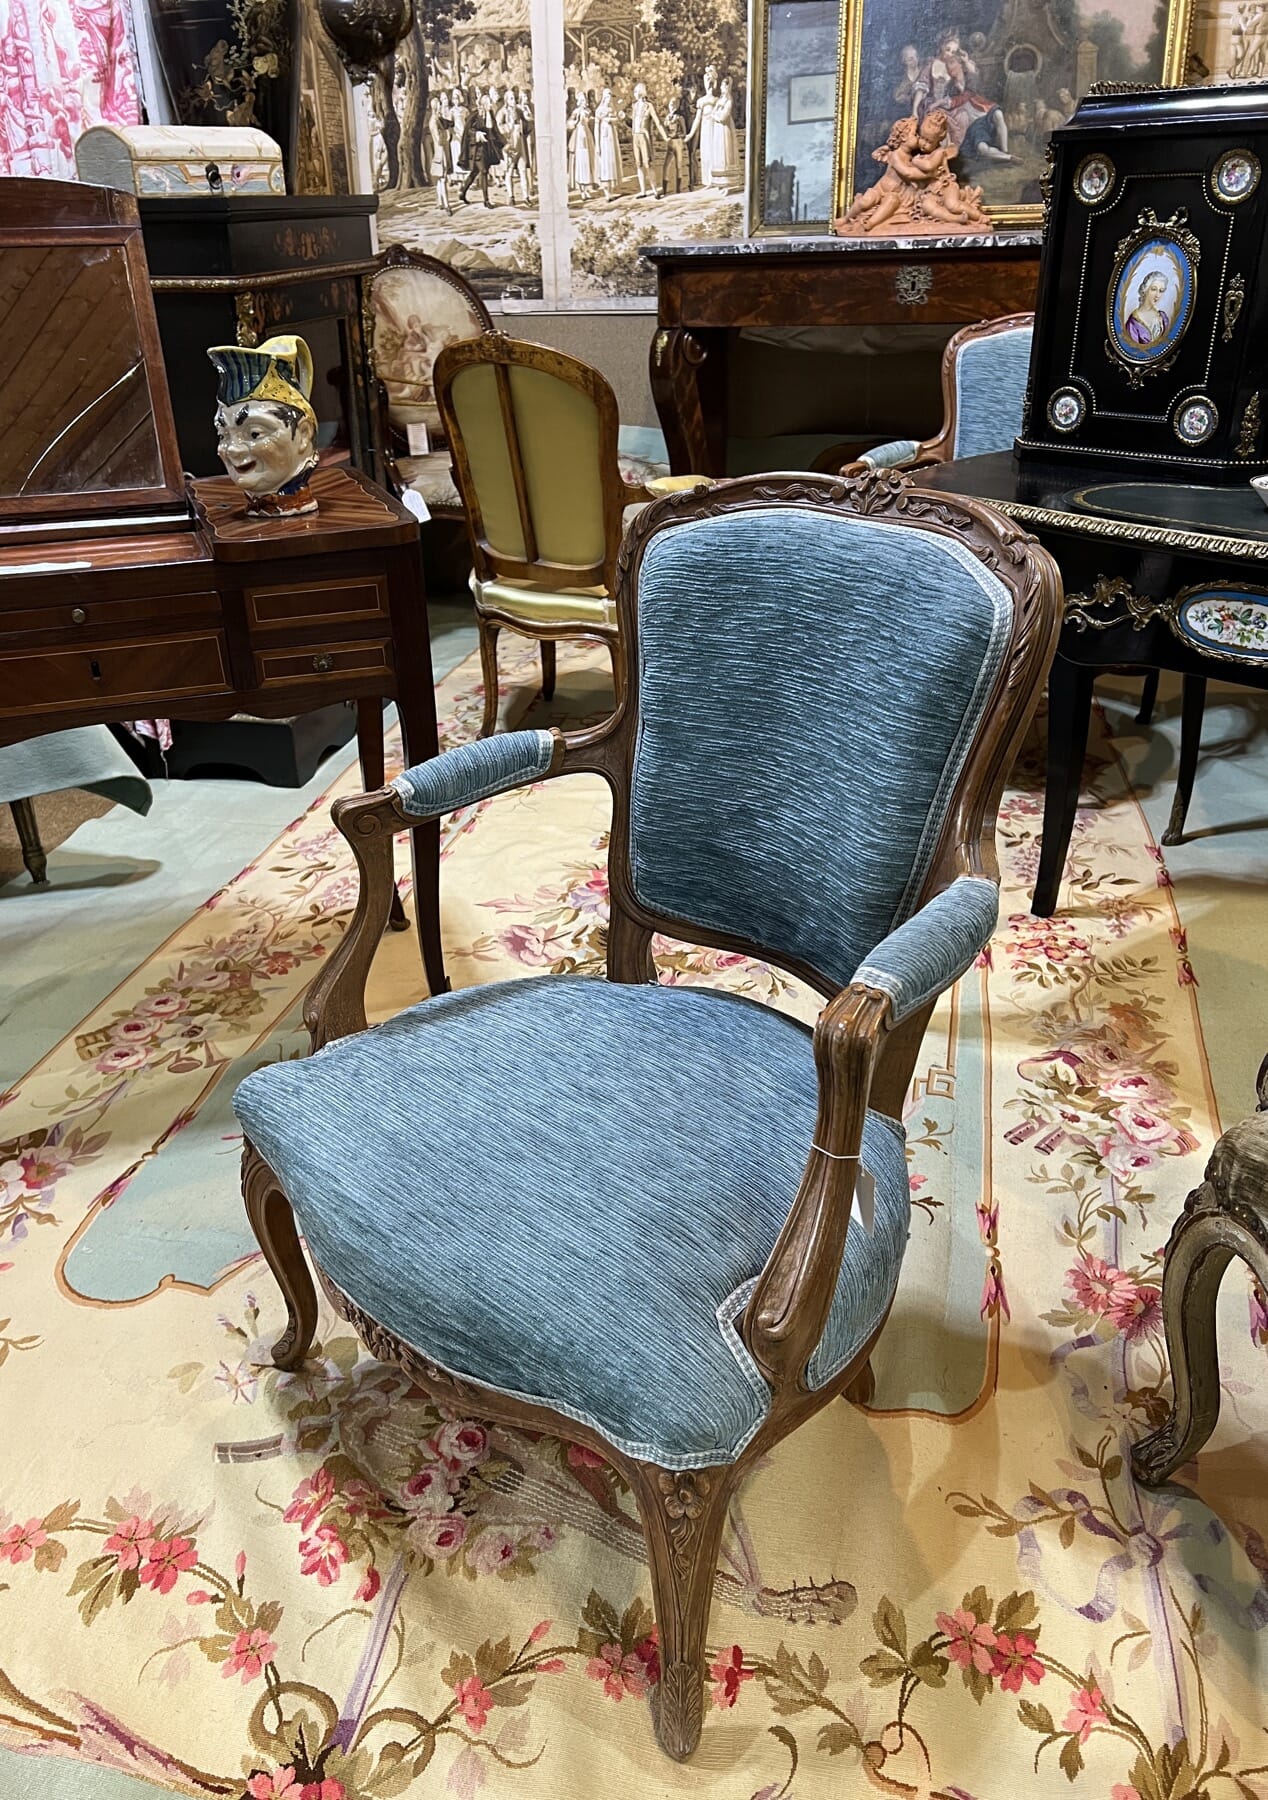 Louis XV Fauteuil, Hard to Find, Set of 6 French chairs - Circa